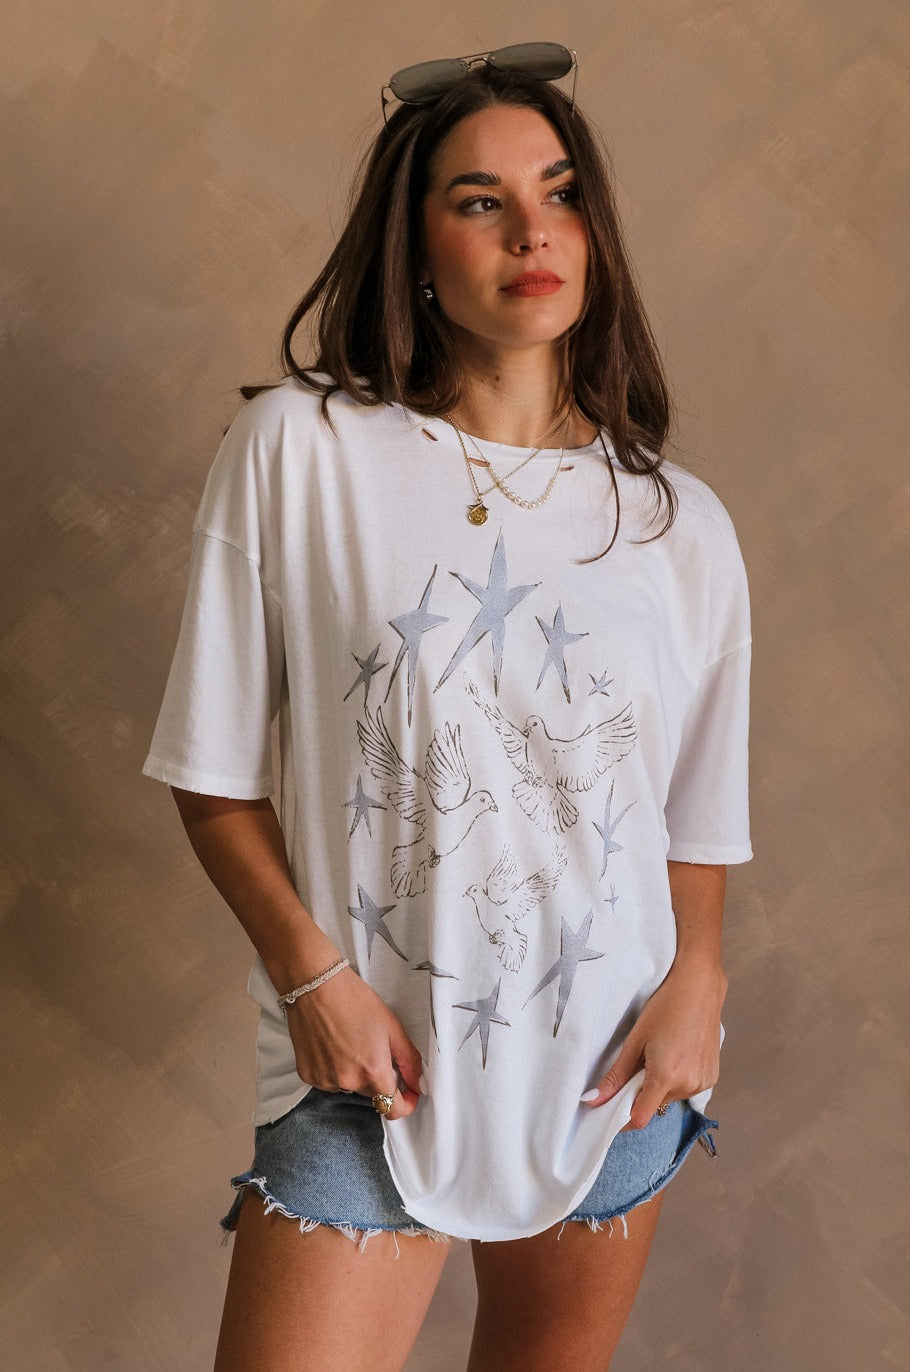 Front view of female model wearing the Stars and Birds White Distressed Graphic Top which features White Cotton Fabric, Distressed Details, Short Sleeves, Round Neckline and Stars and Birds Graphic